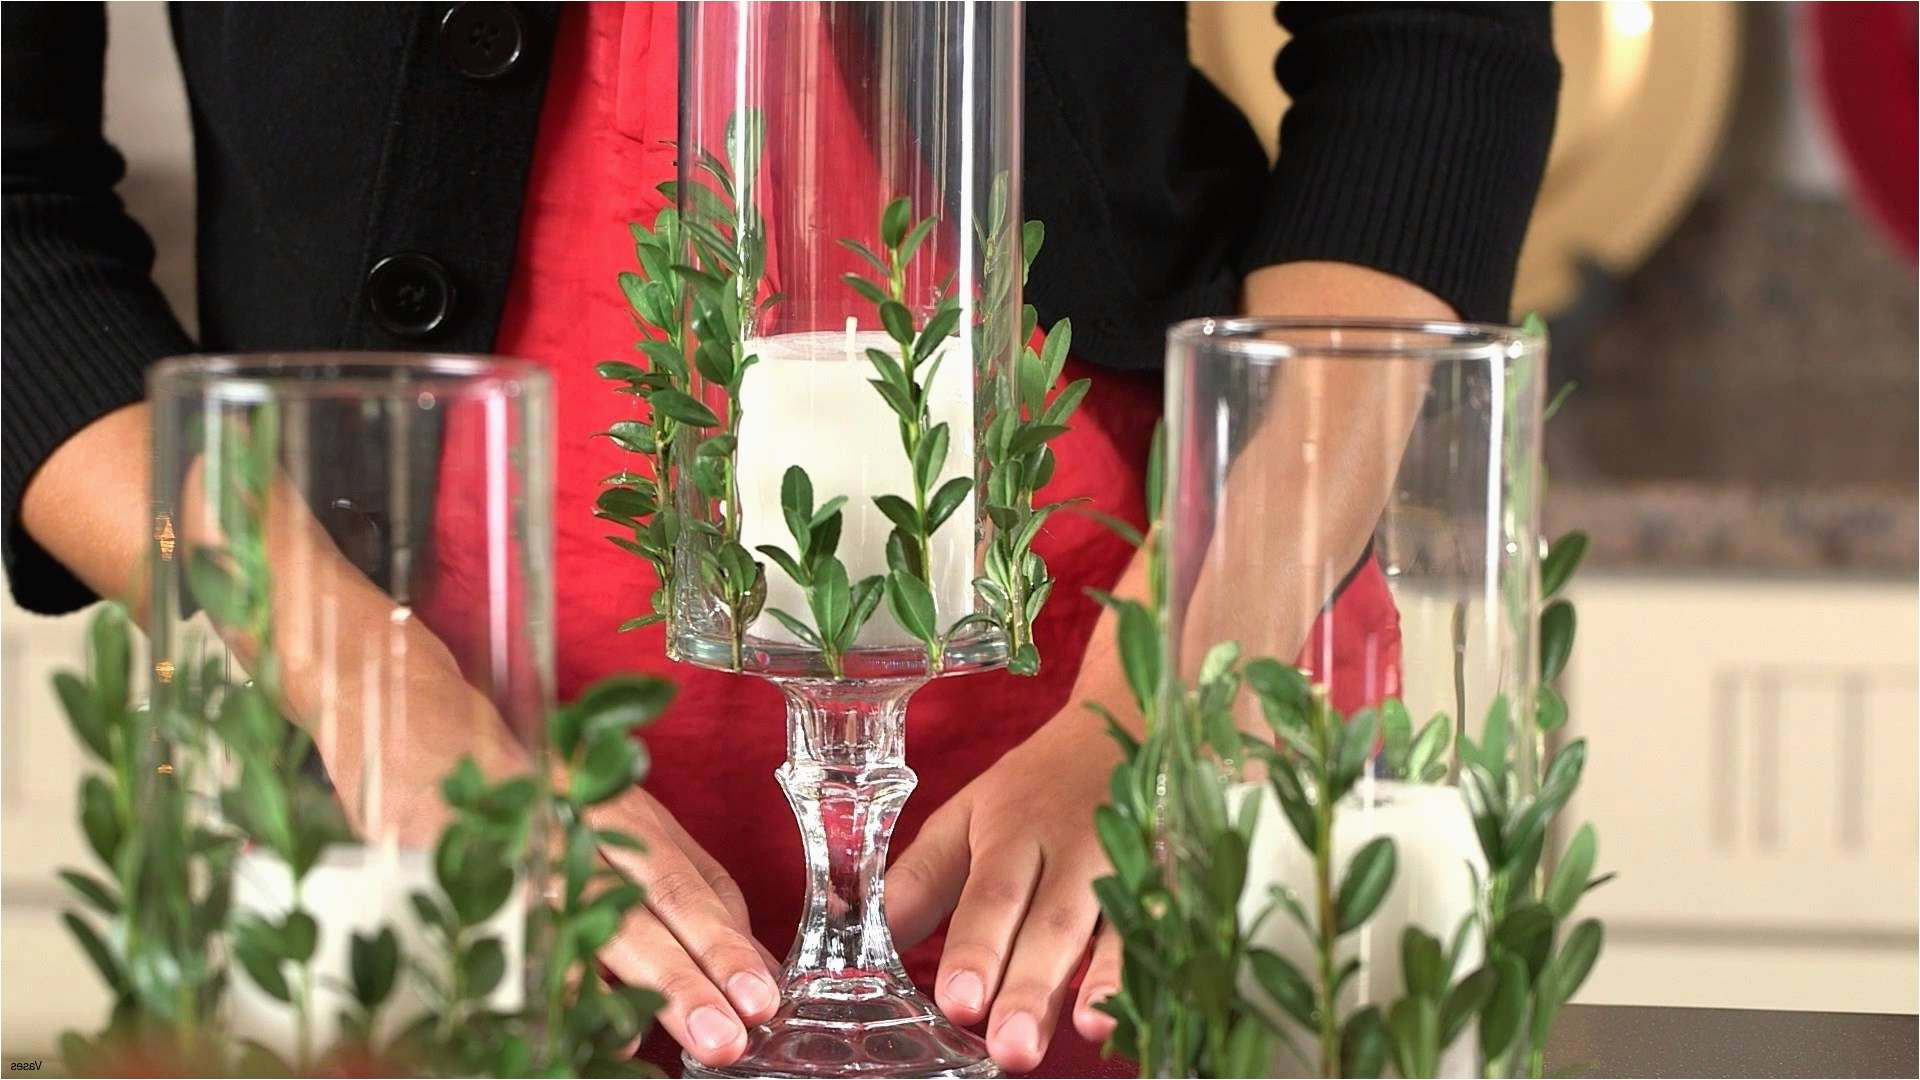 16 attractive Tall Vases for Wedding Tables 2024 free download tall vases for wedding tables of tree decorations style dollar tree wedding decorations awesome h in tree decorations 2018 dollar tree wedding decorations awesome h vases dollar vase i 0d ga